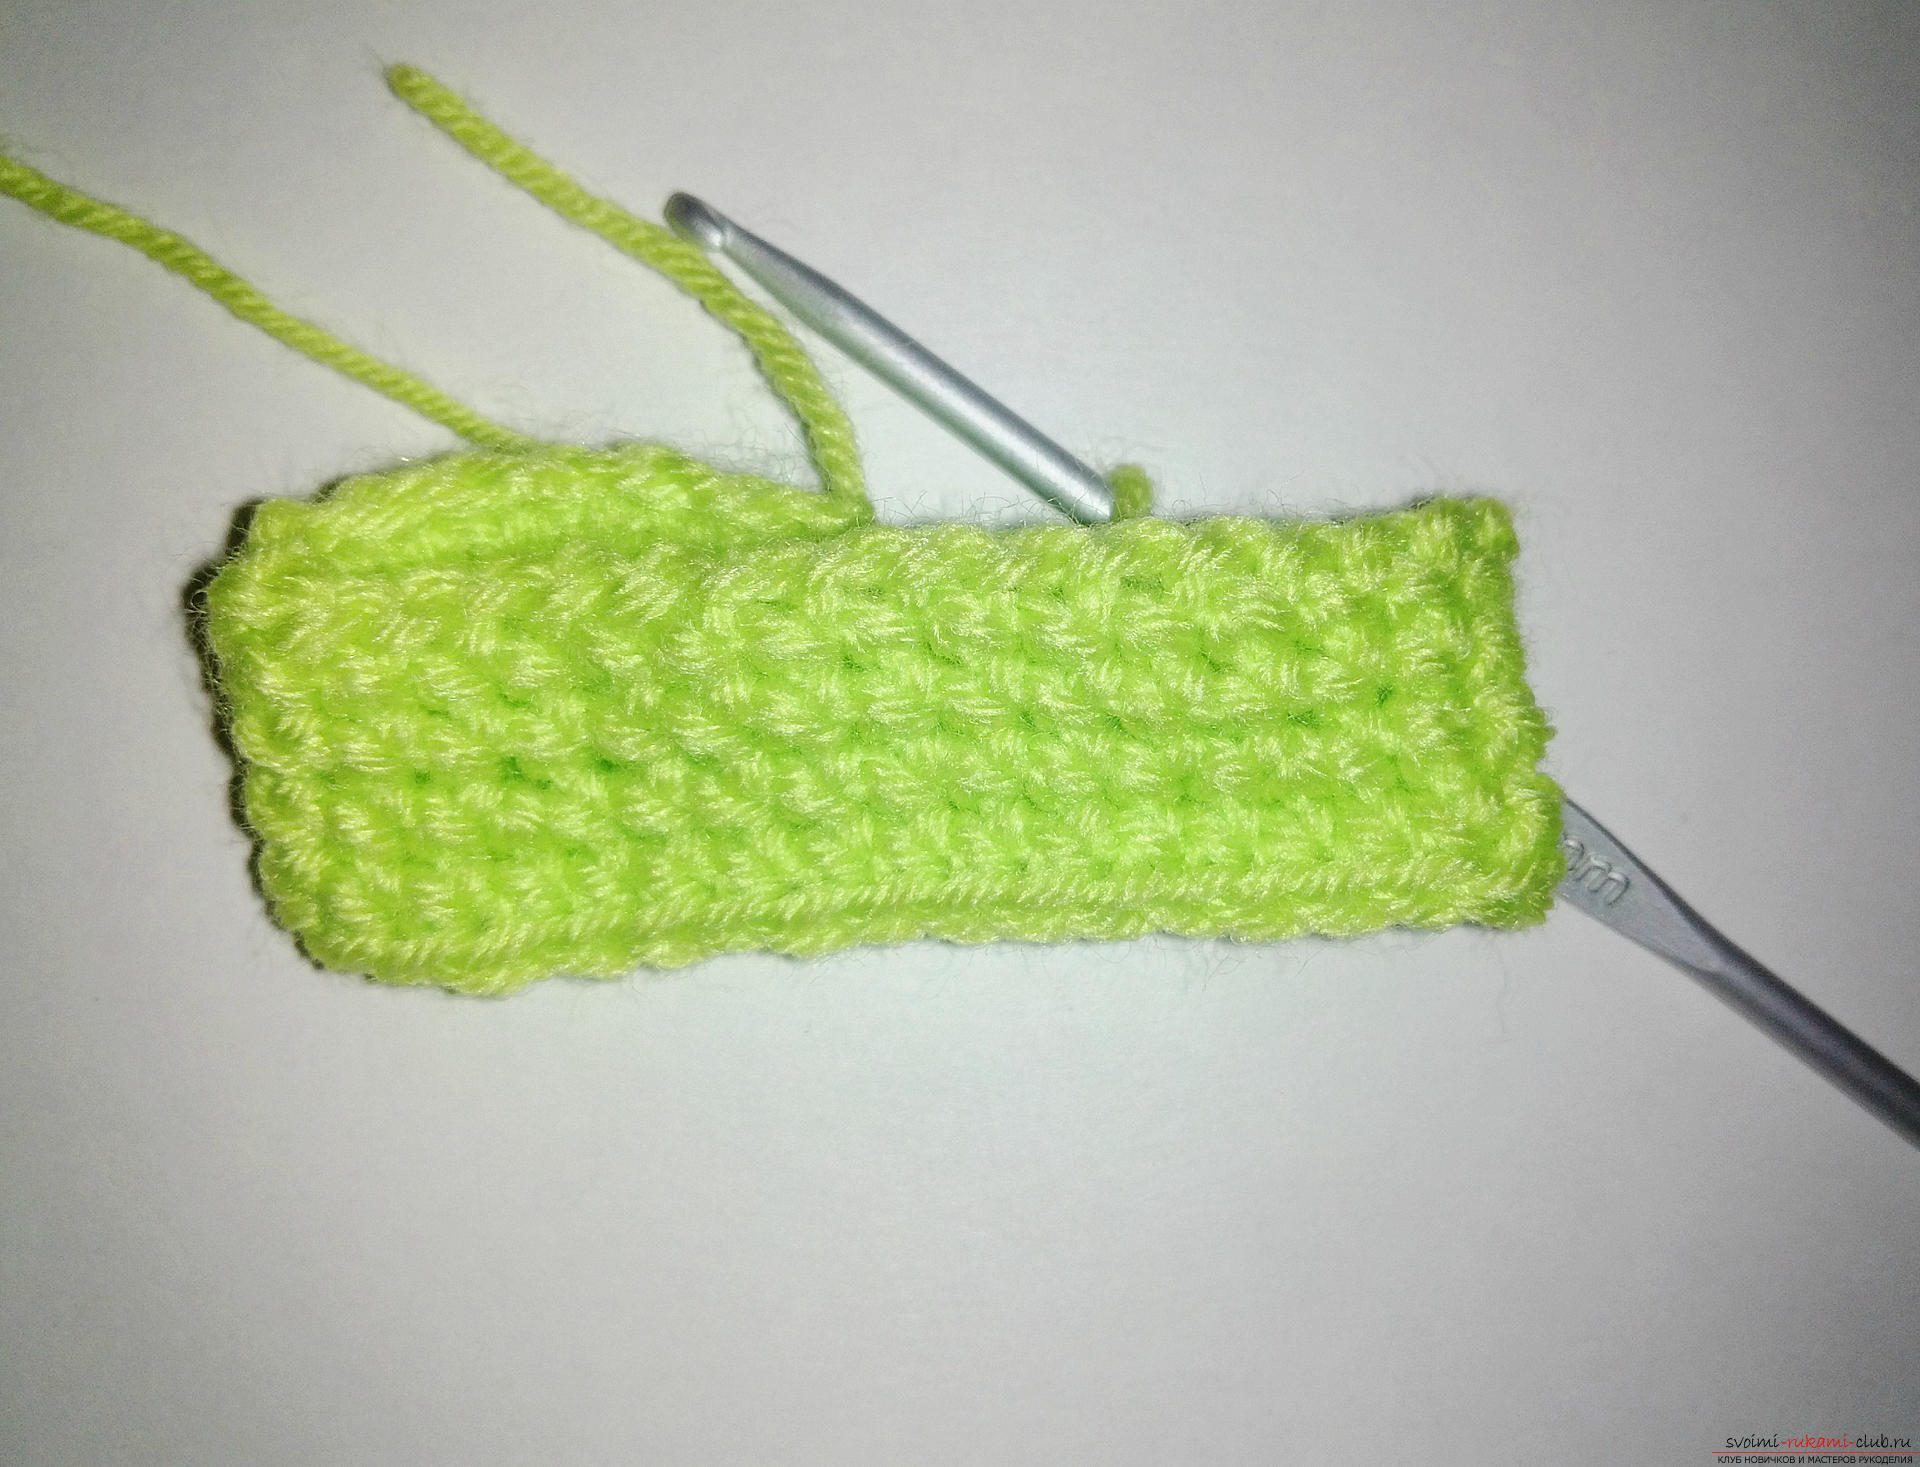 A master class with a photo and a description of the process will teach how to tie fishnet mitts crochet. Picture №3